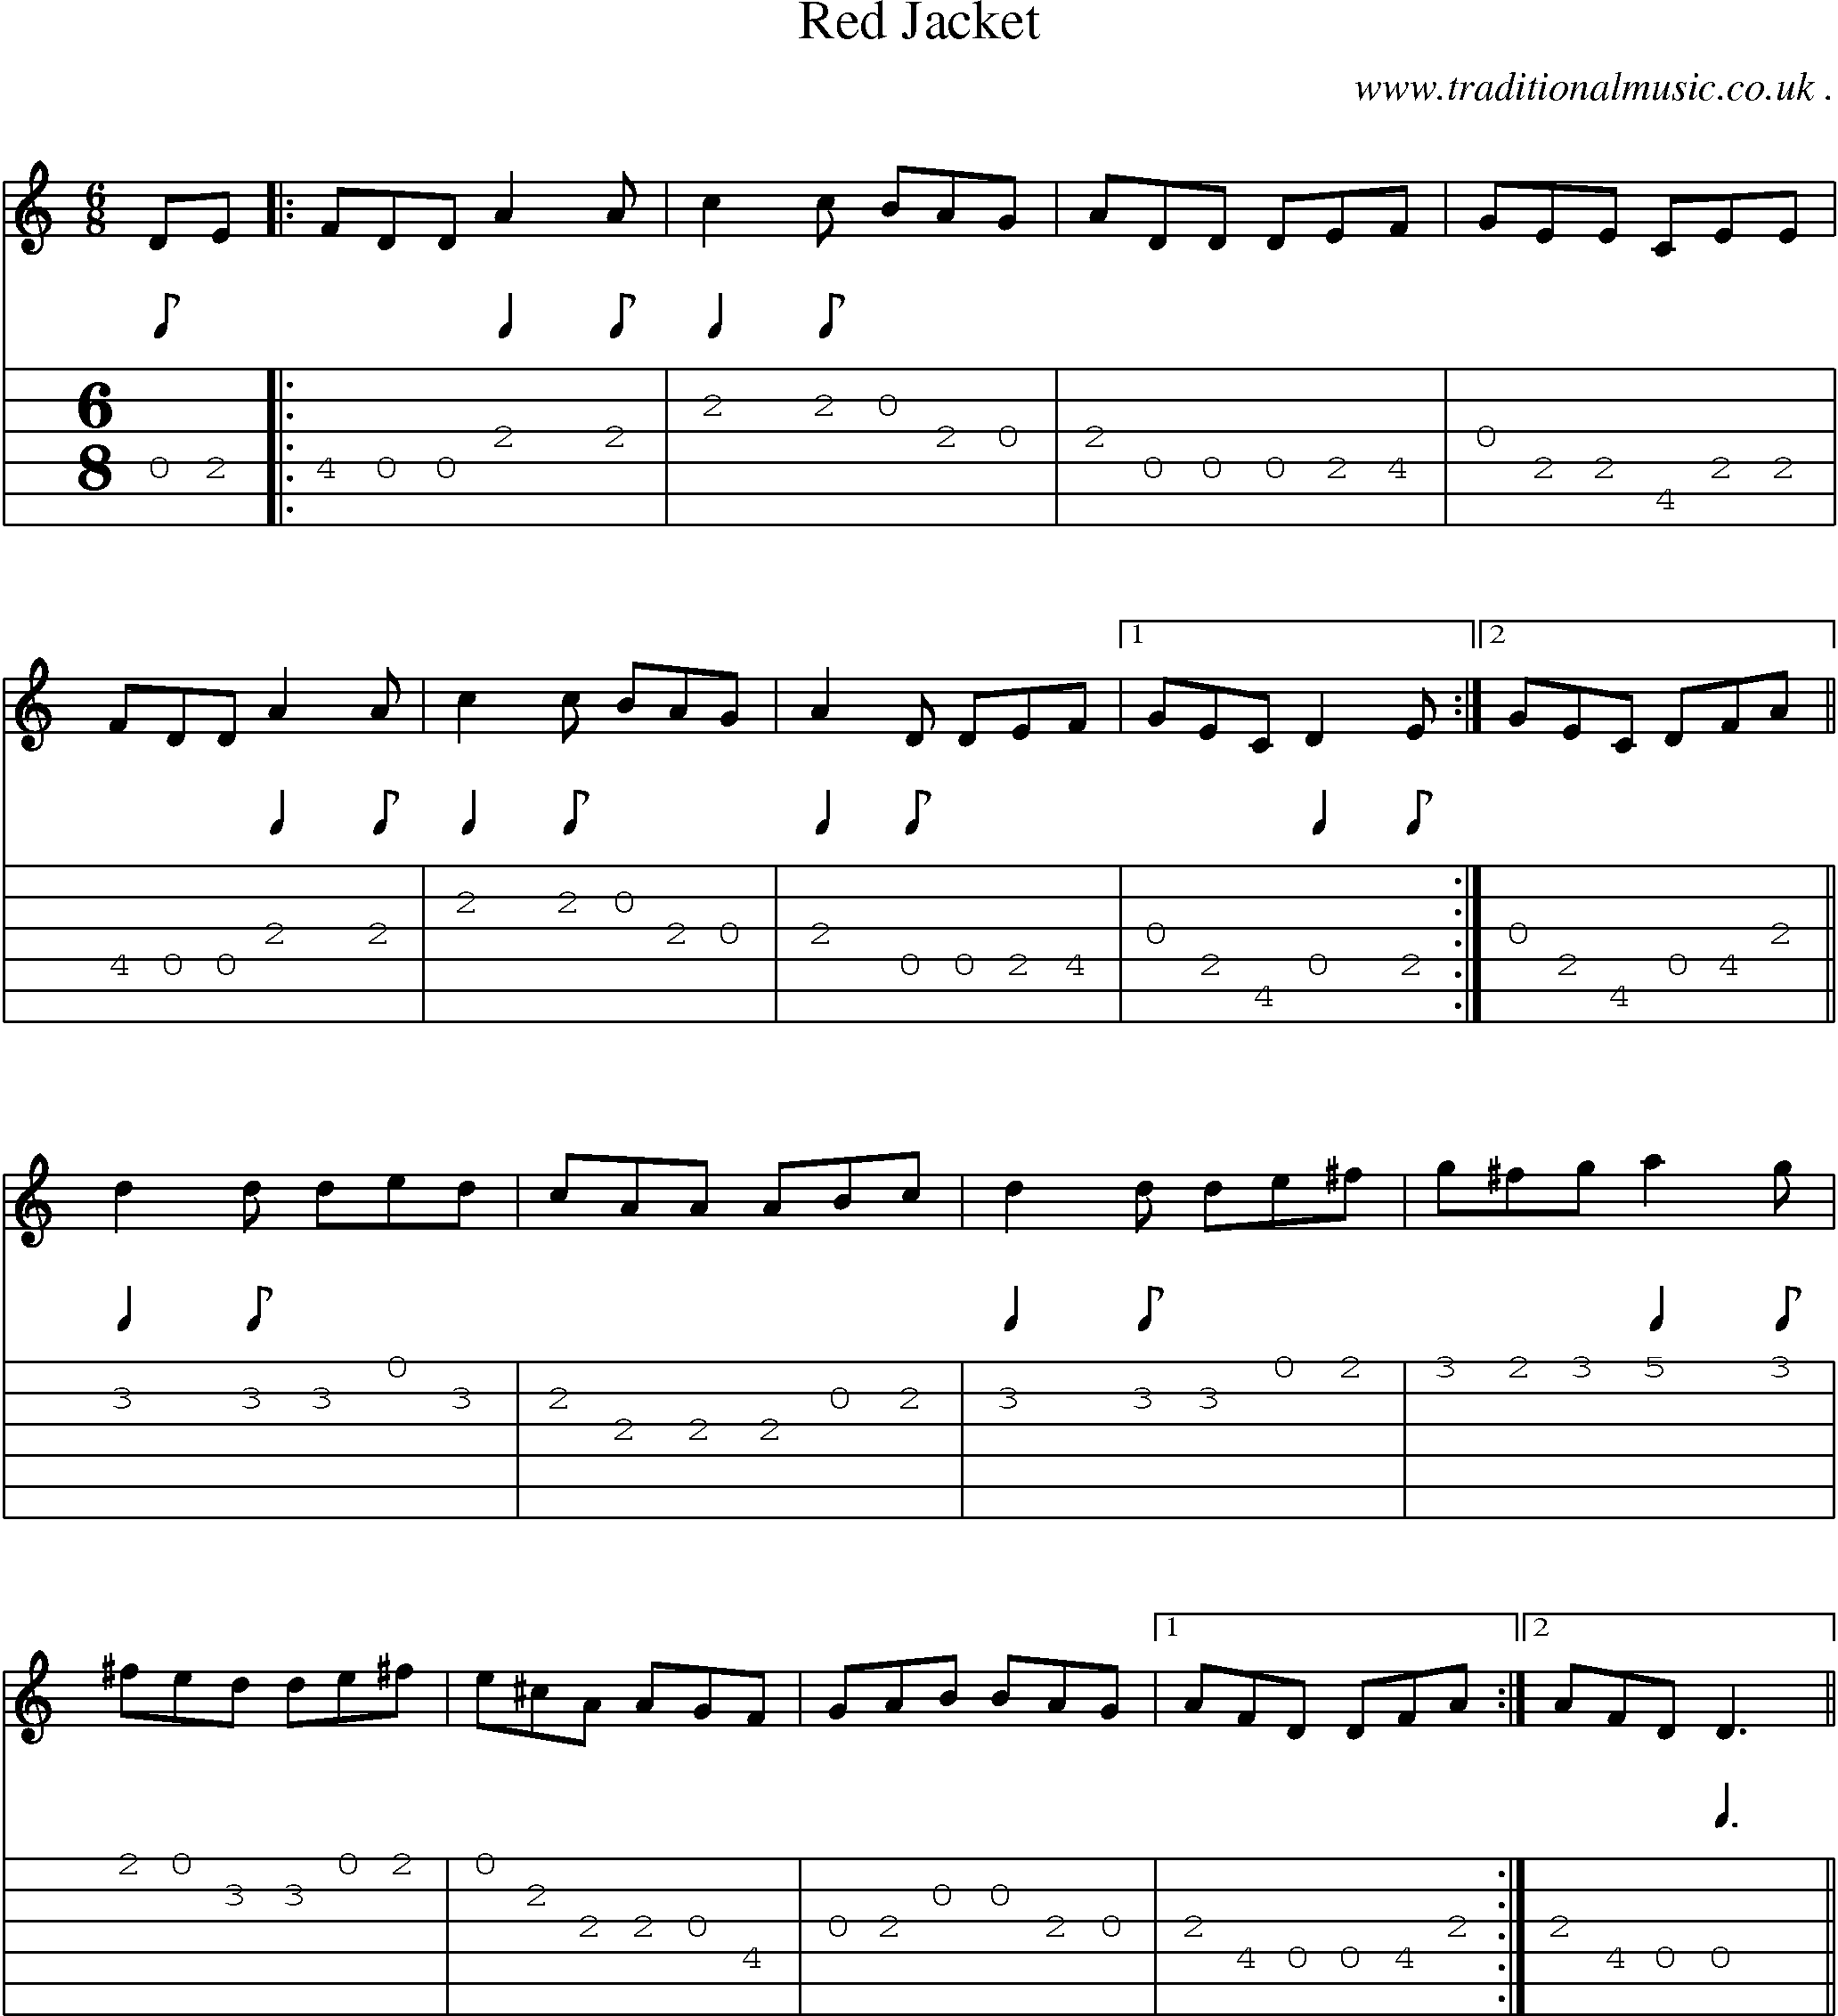 Sheet-Music and Guitar Tabs for Red Jacket